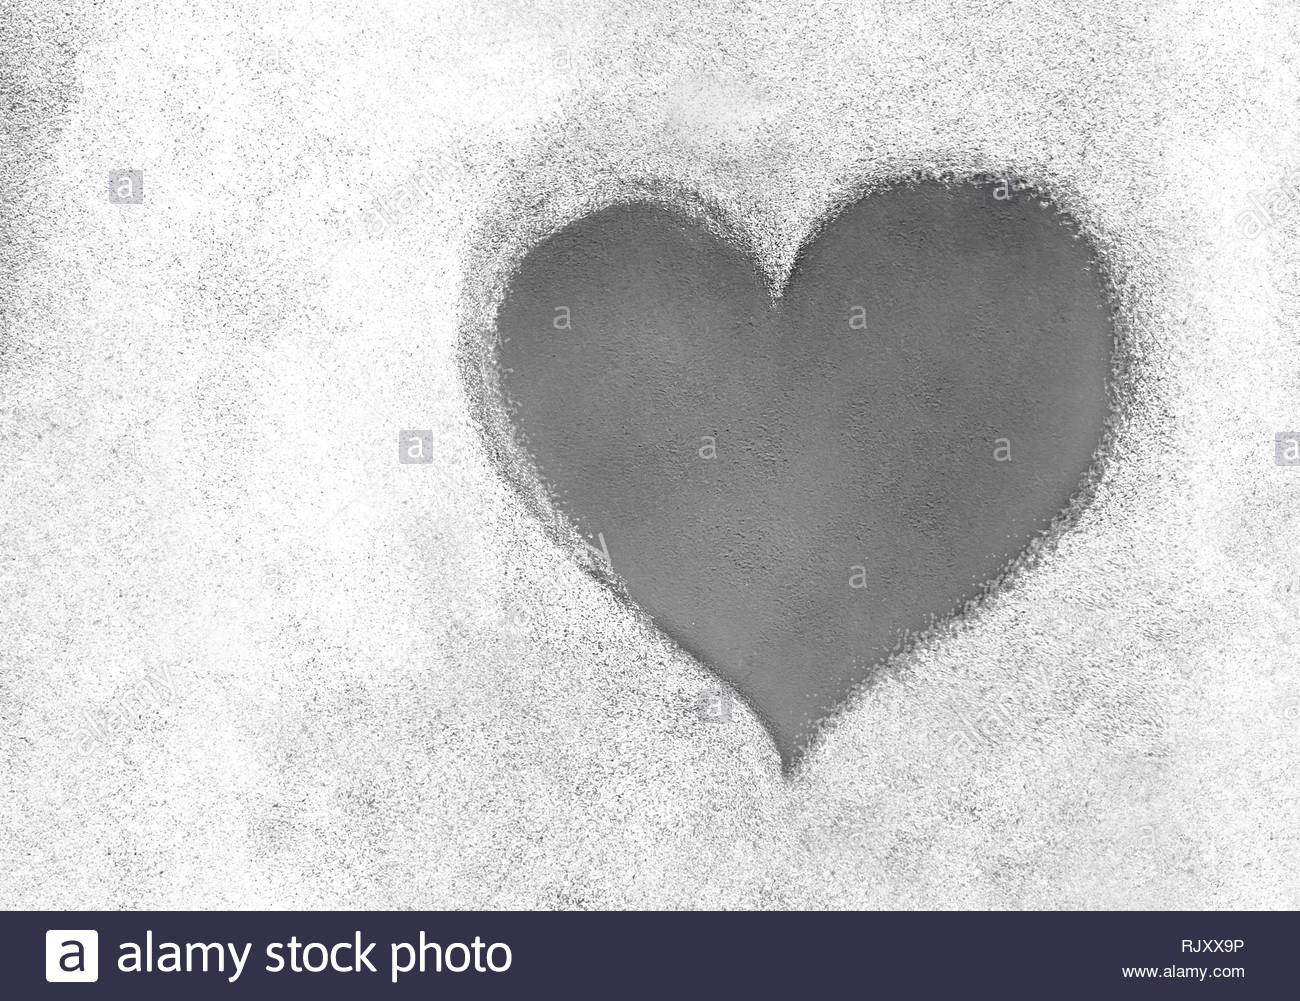 Grunge Texture With Grey Heart Symbol It Can Be Used As A